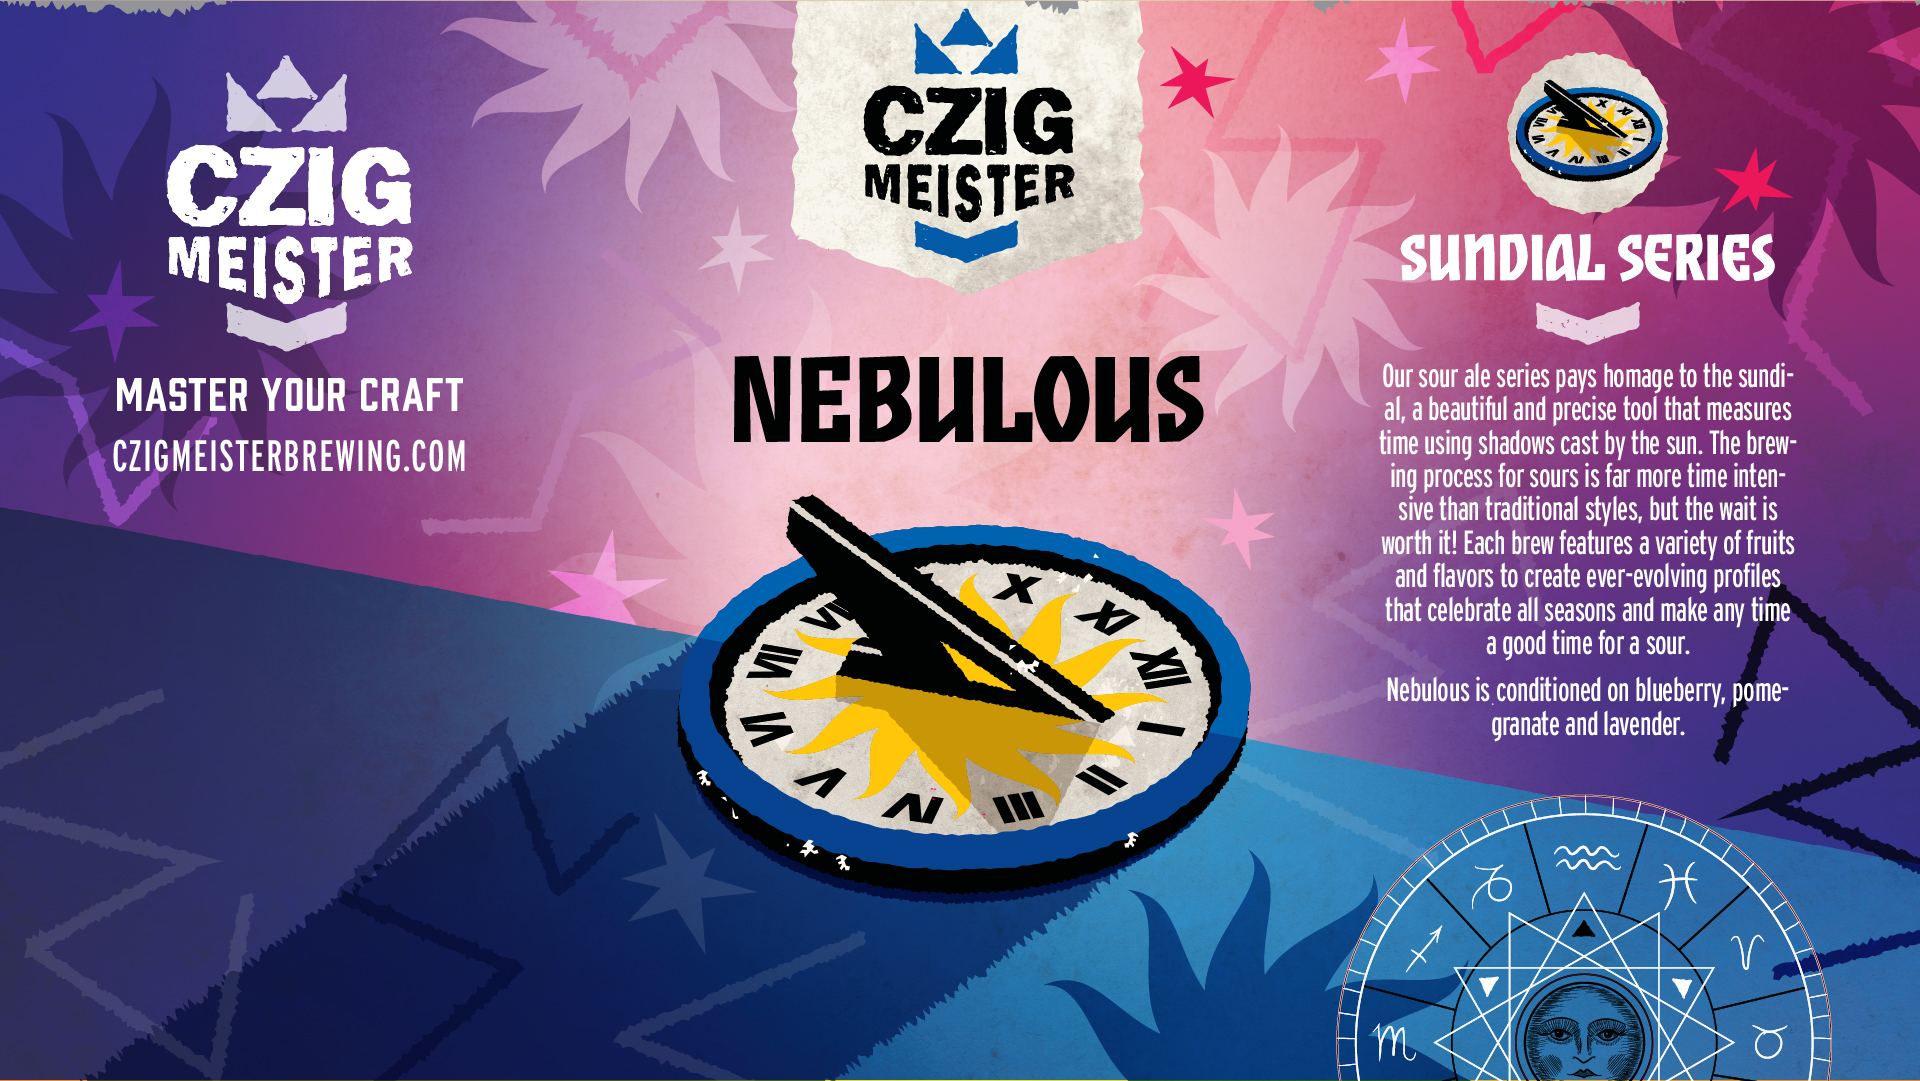 Sundial Series Nebulous from Czig Meister Brewing Company releasing September 30th